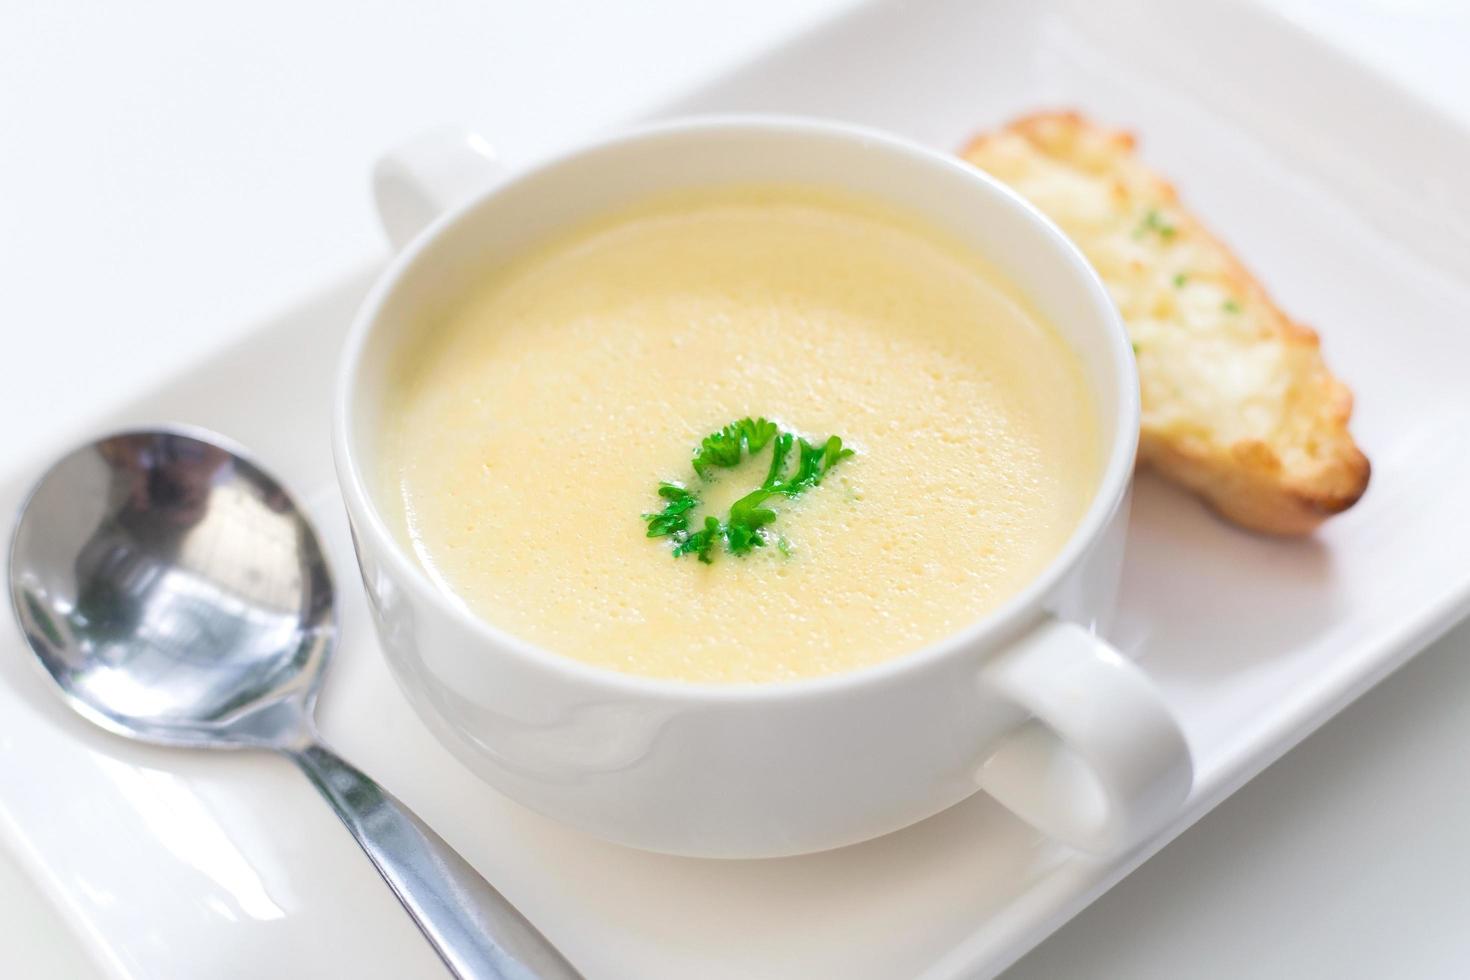 Delicious corn soup In a white bowl served with bread. photo